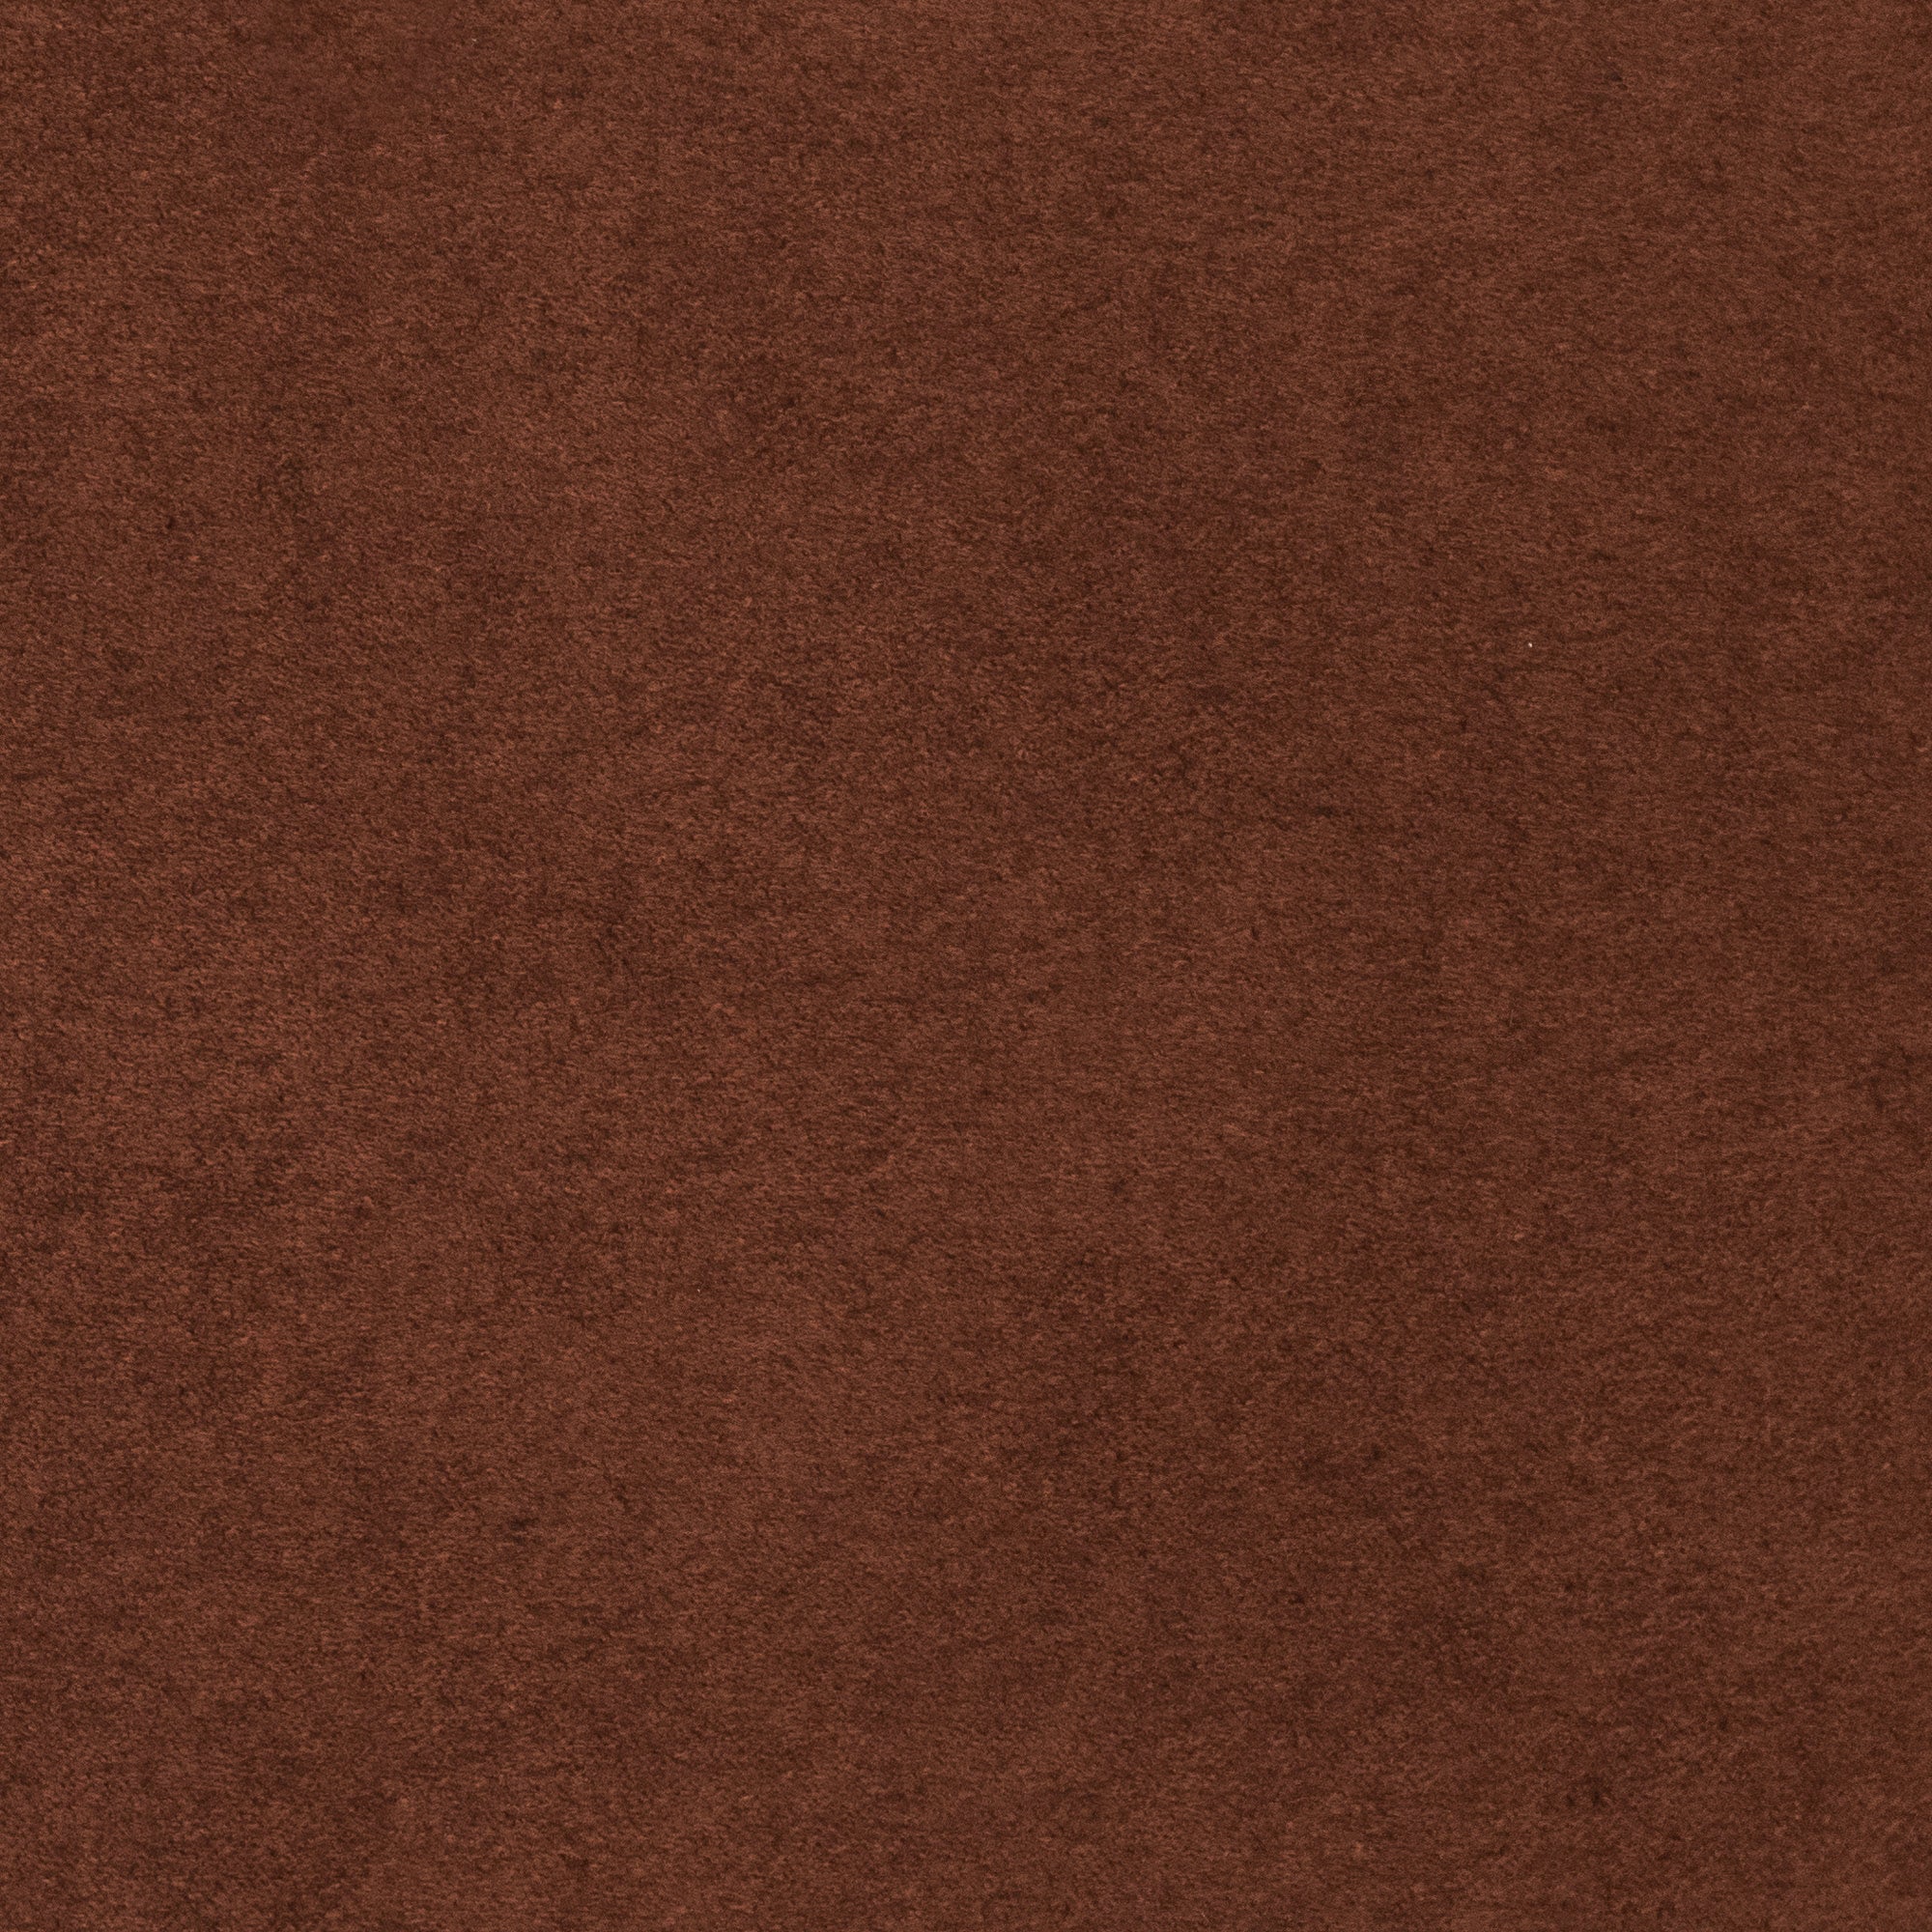 C061 Beige, Microsuede Suede Upholstery Fabric By The Yard